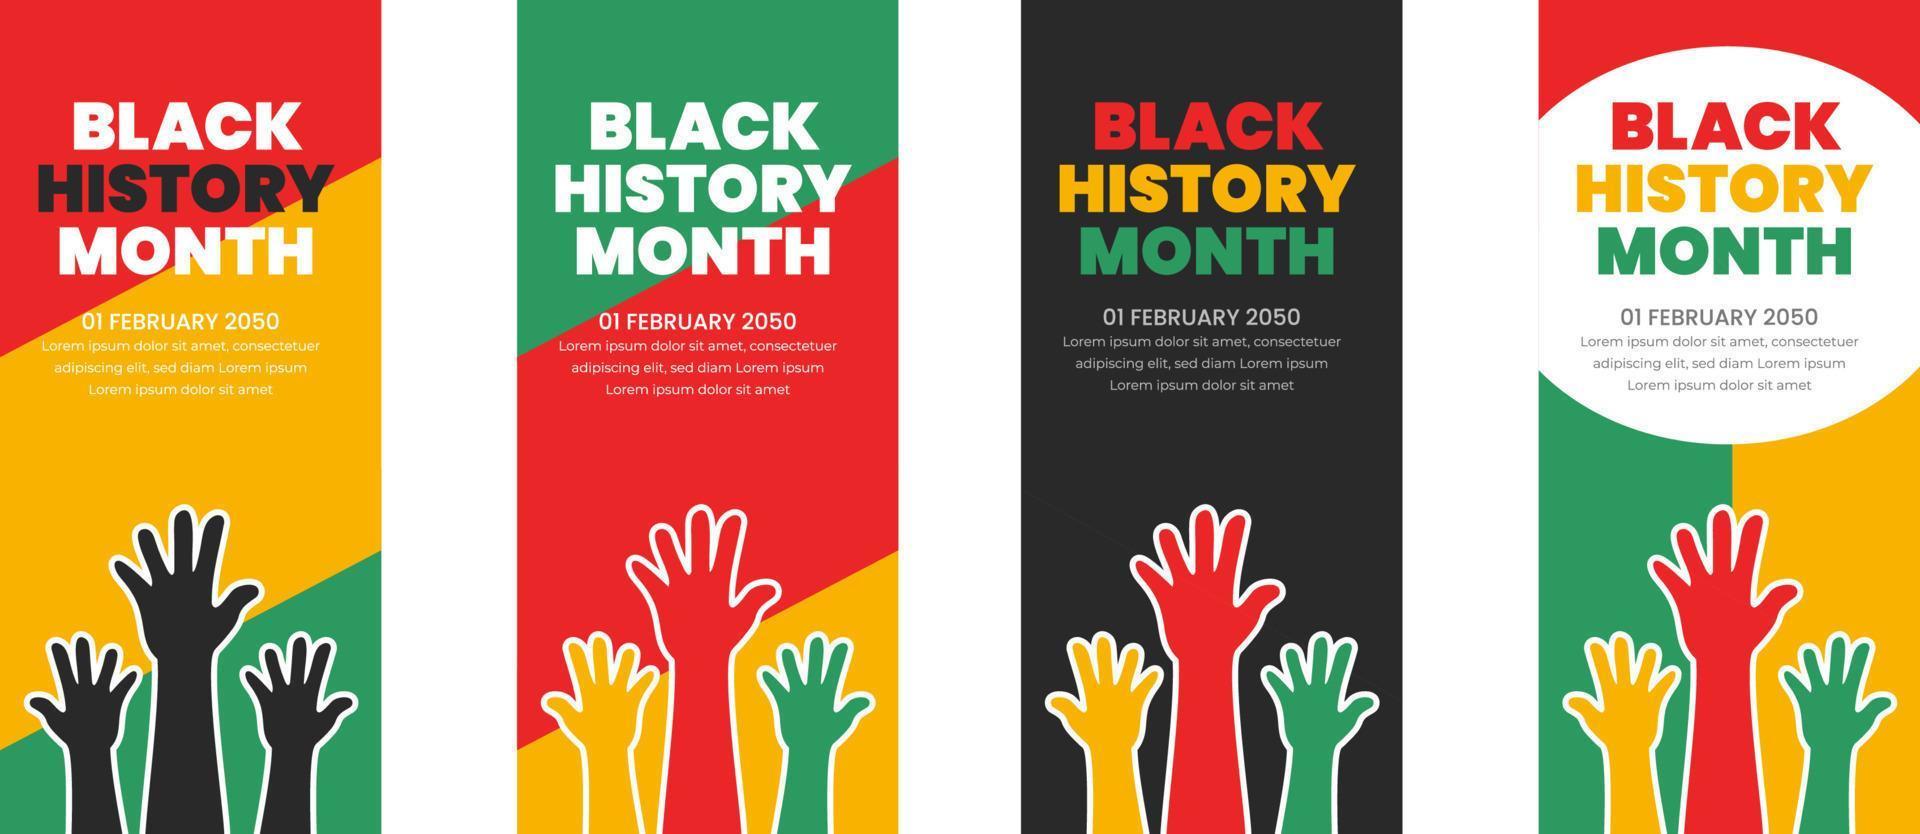 black history month portrait background design set. black history month power hand roll up banner design. African American History or Black History Month. Celebrated annually in February vector